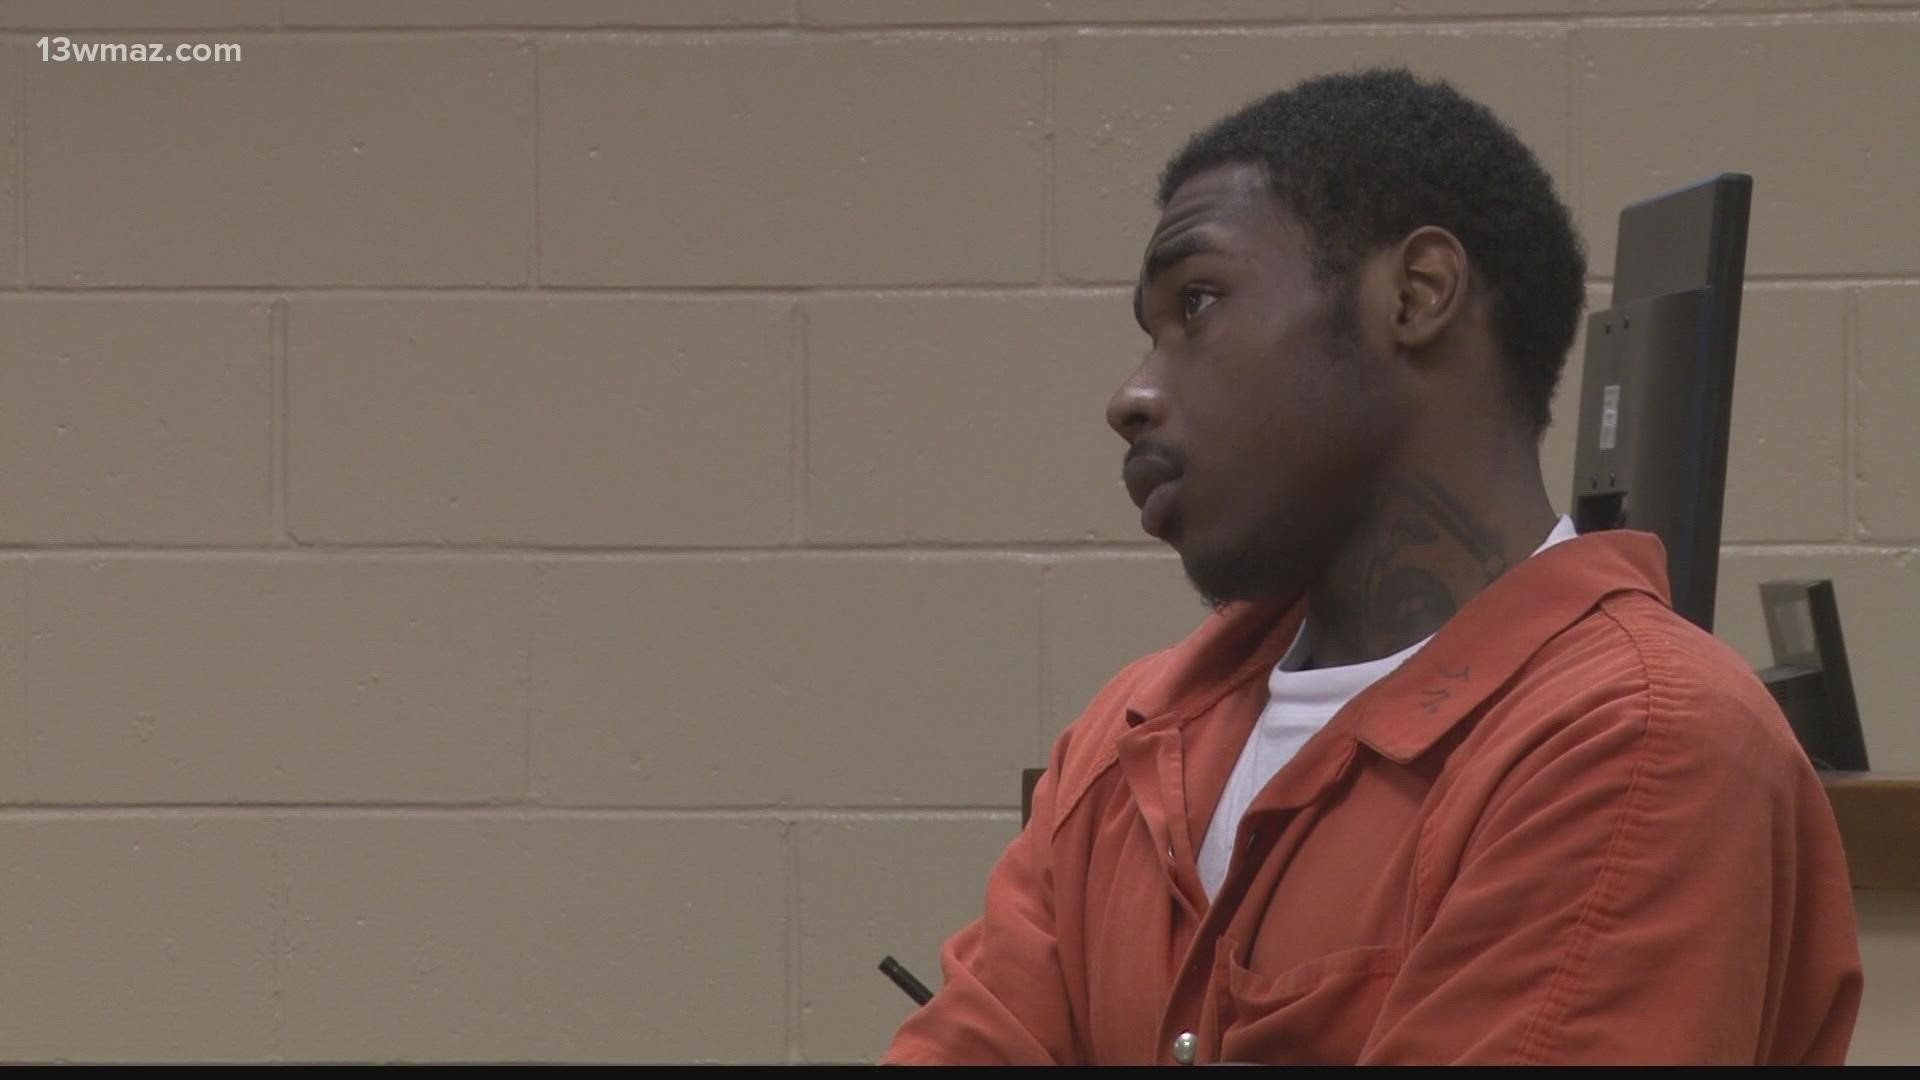 21-year-old Alonzo Hicks was charged with felony murder, possession of a firearm during a crime, and aggravated assault.